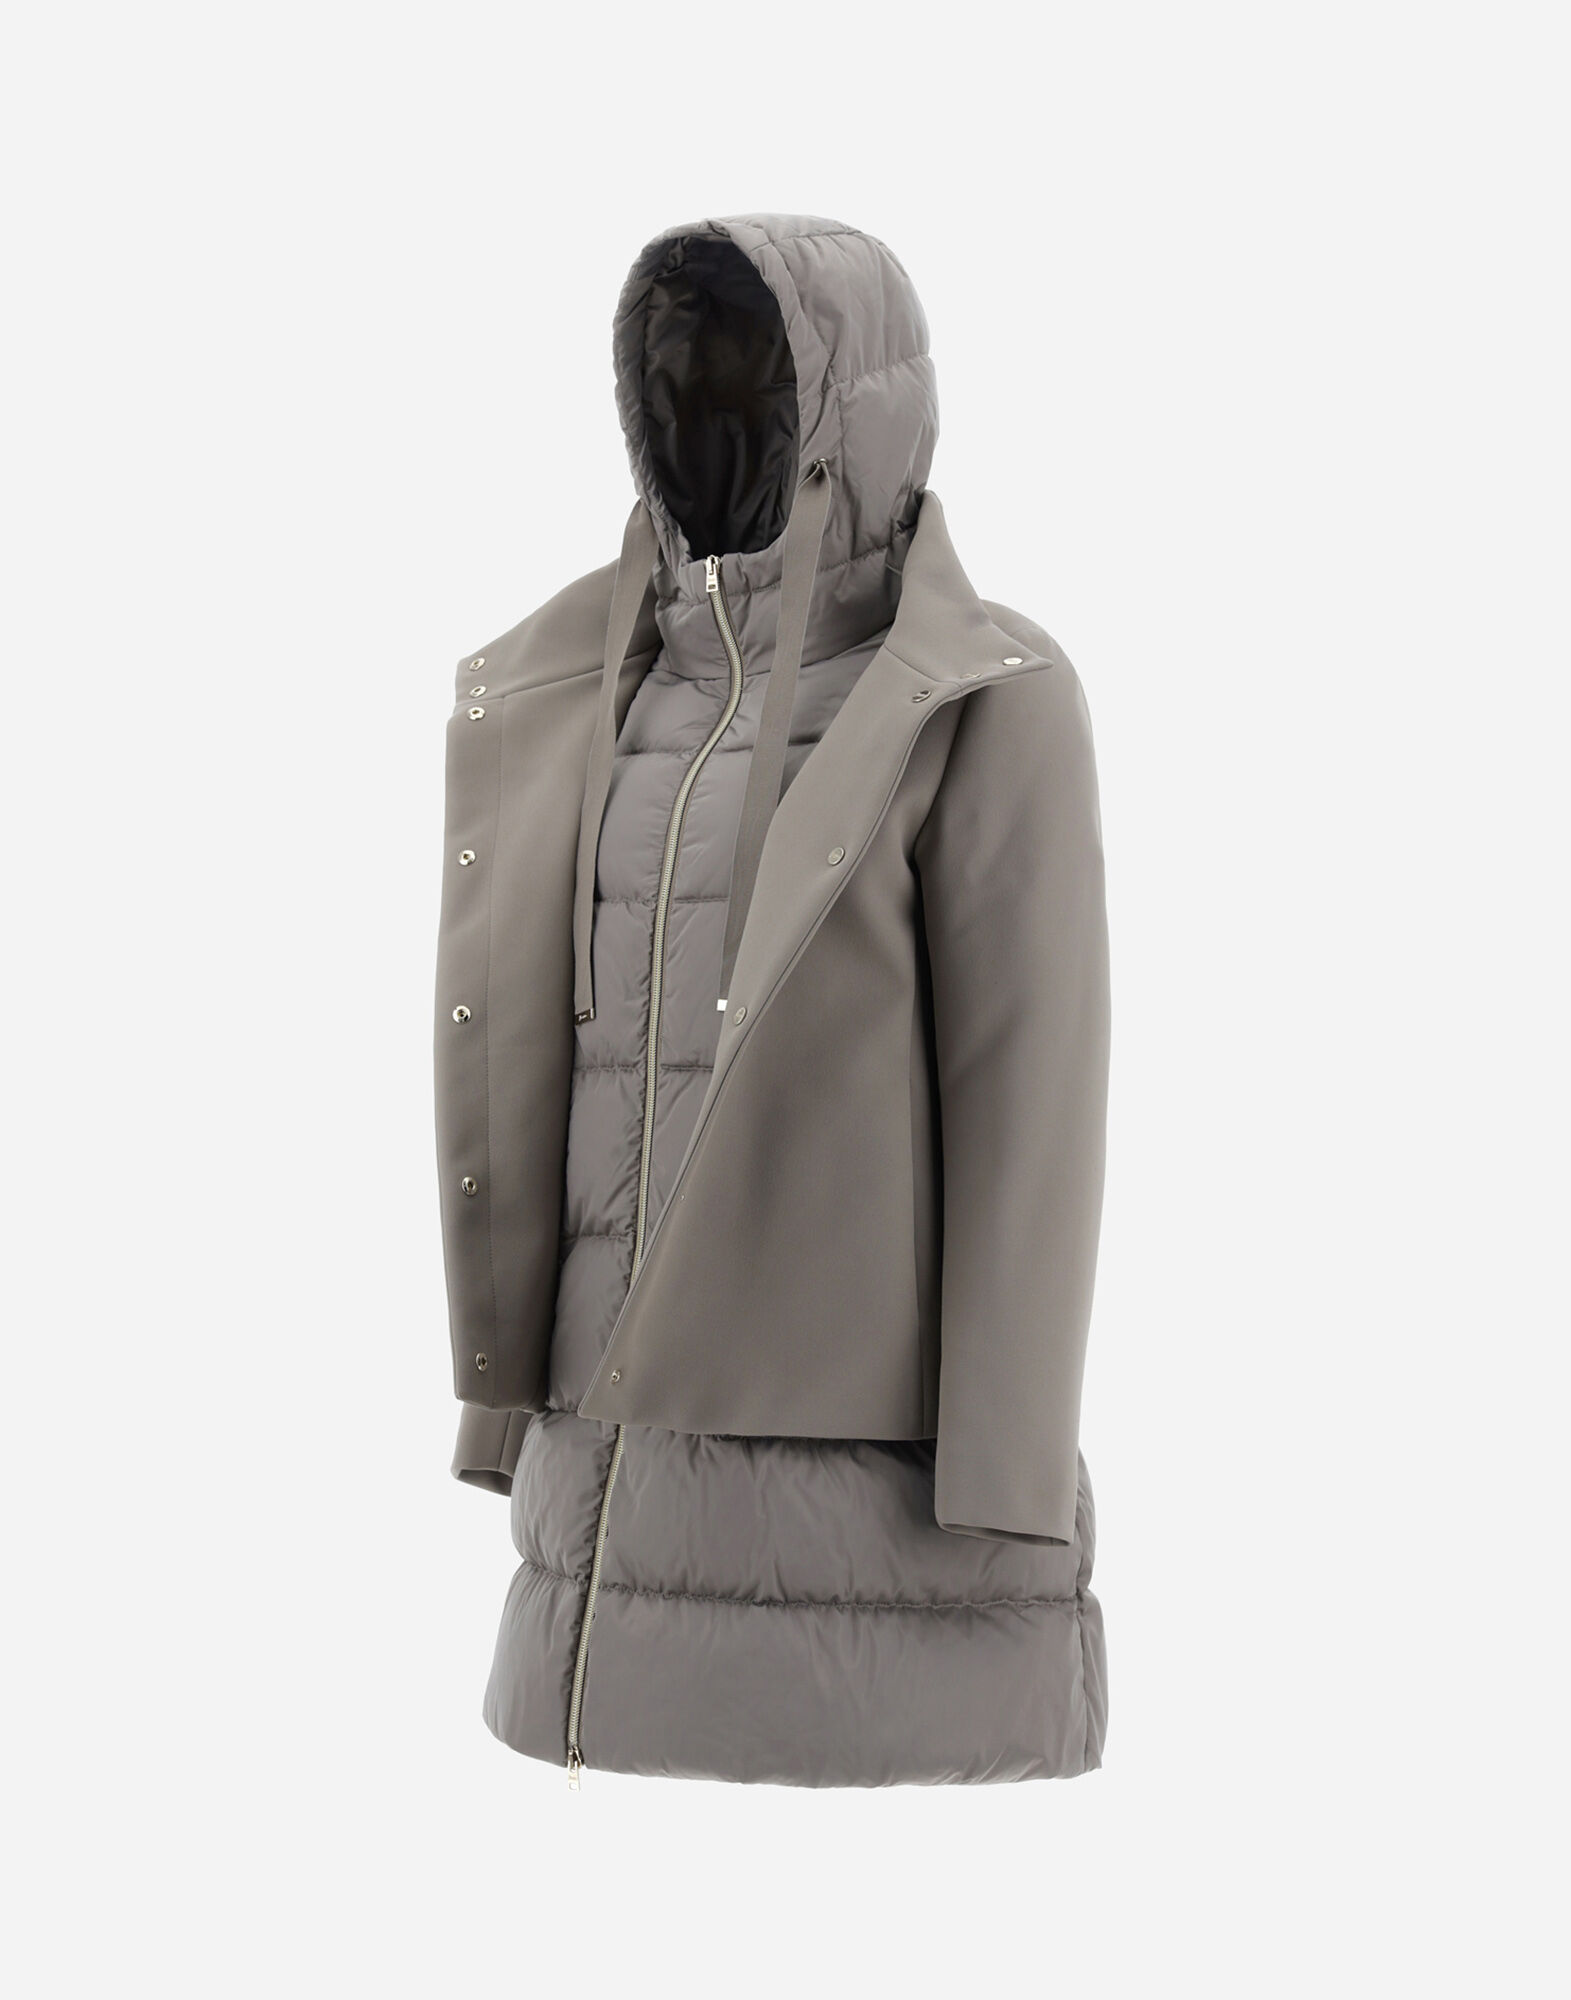 NEW CITY GLAM AND SATIN A-LINE JACKET in Dove Grey for Women | Herno®